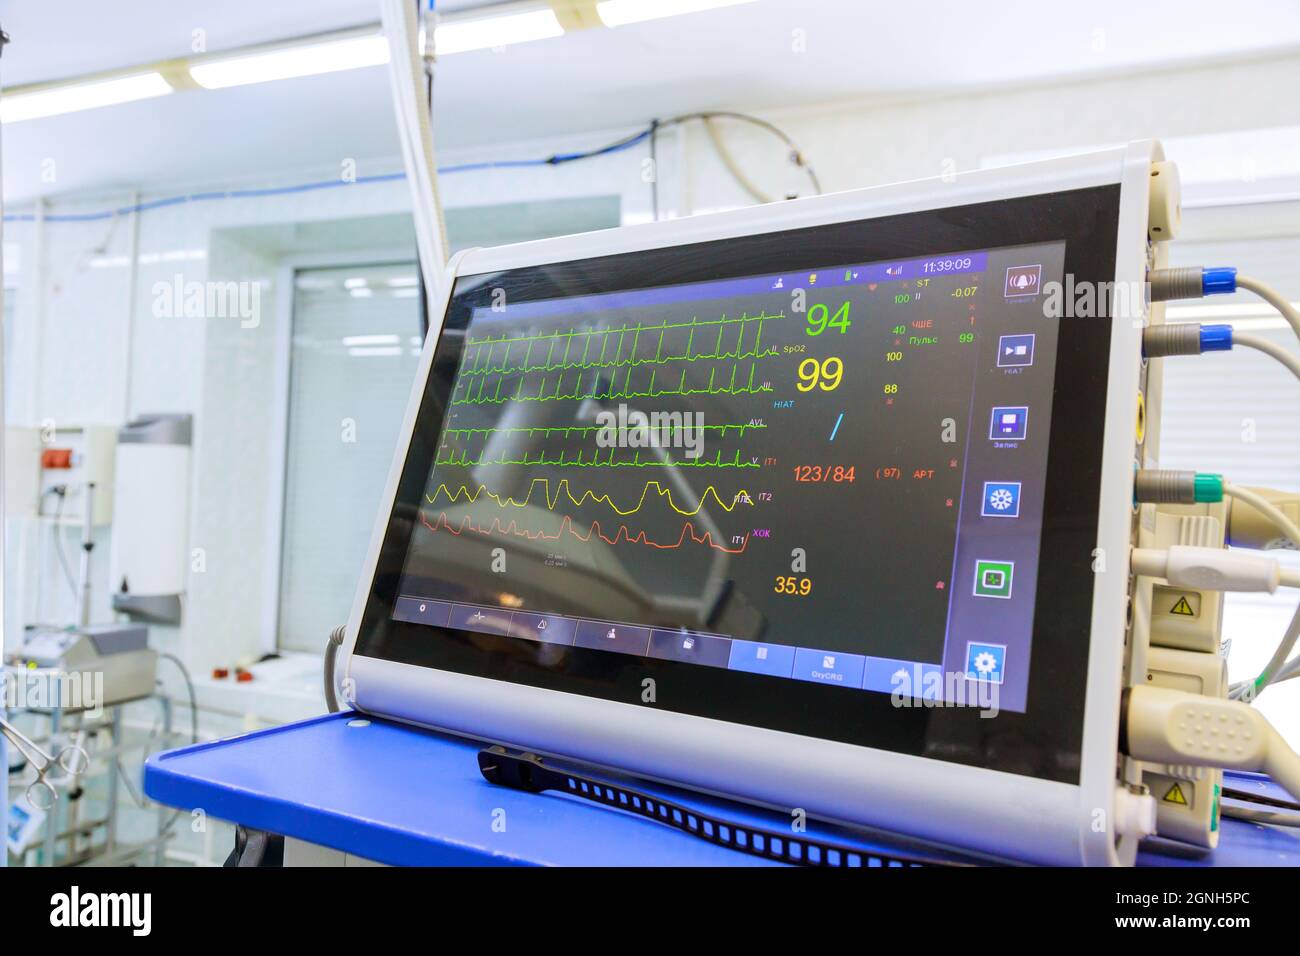 Ventilation equipment close up image monitor of computer device in intensive care Stock Photo